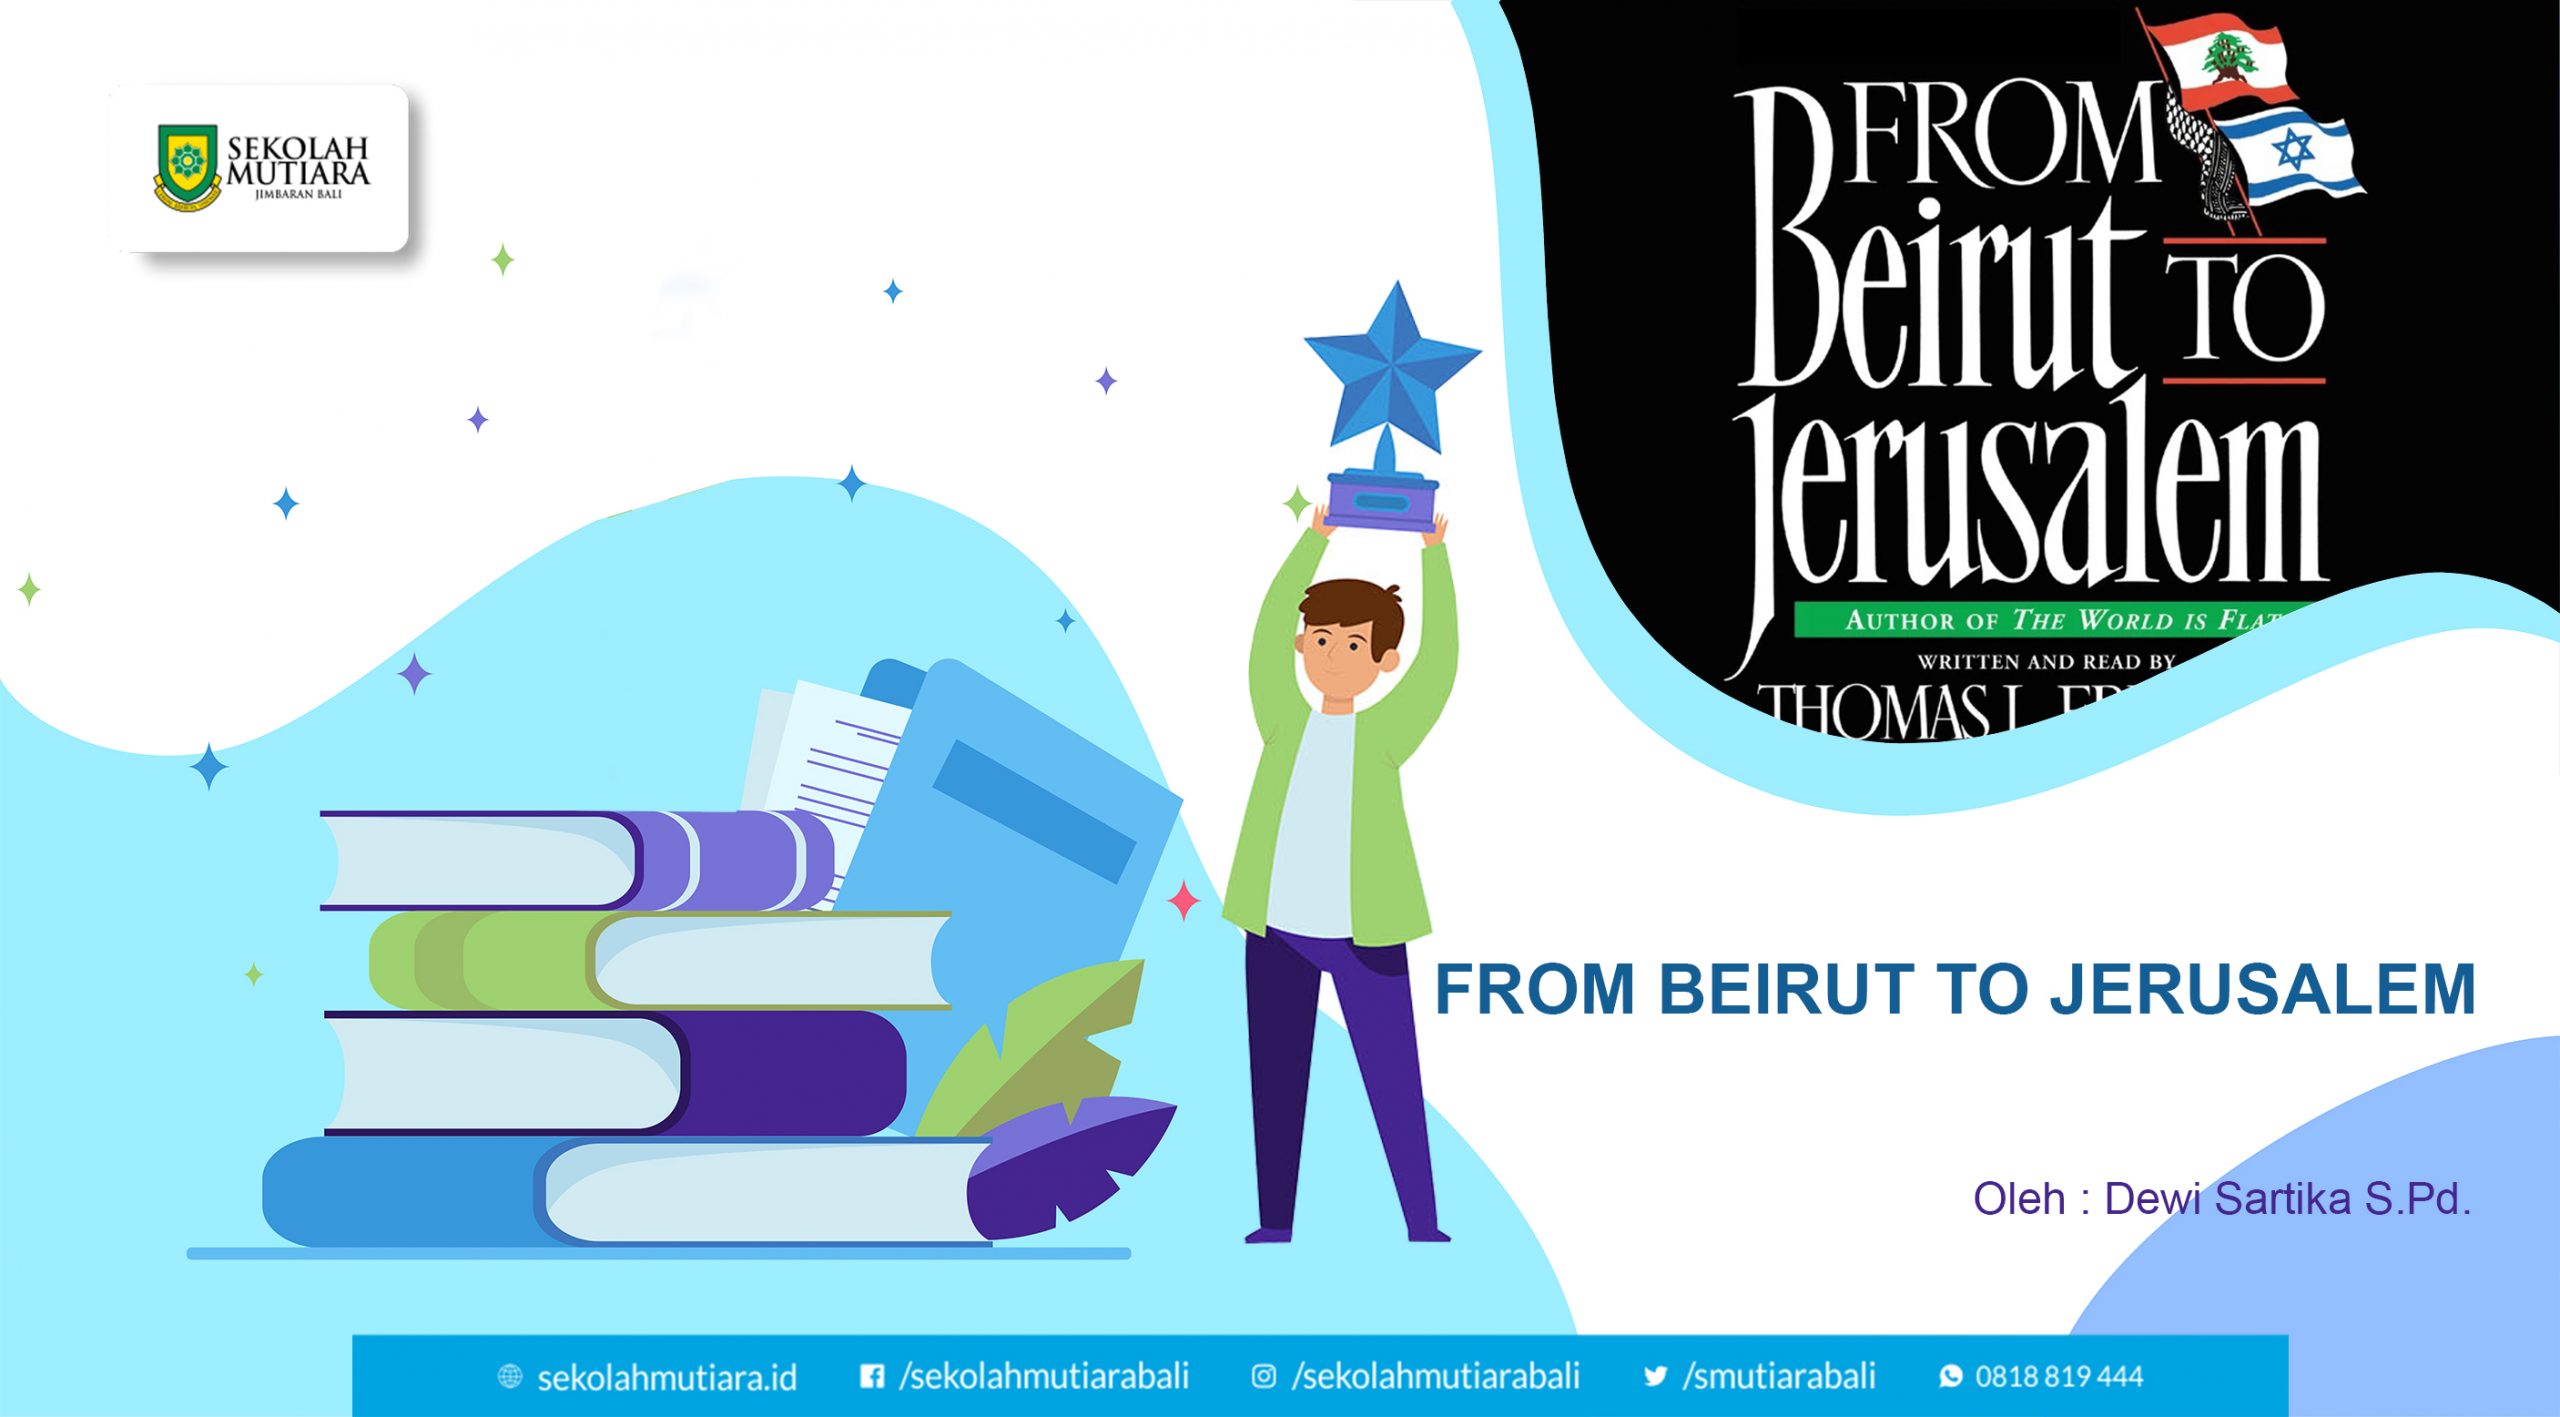 FROM BEIRUT TO JERUSALLEM